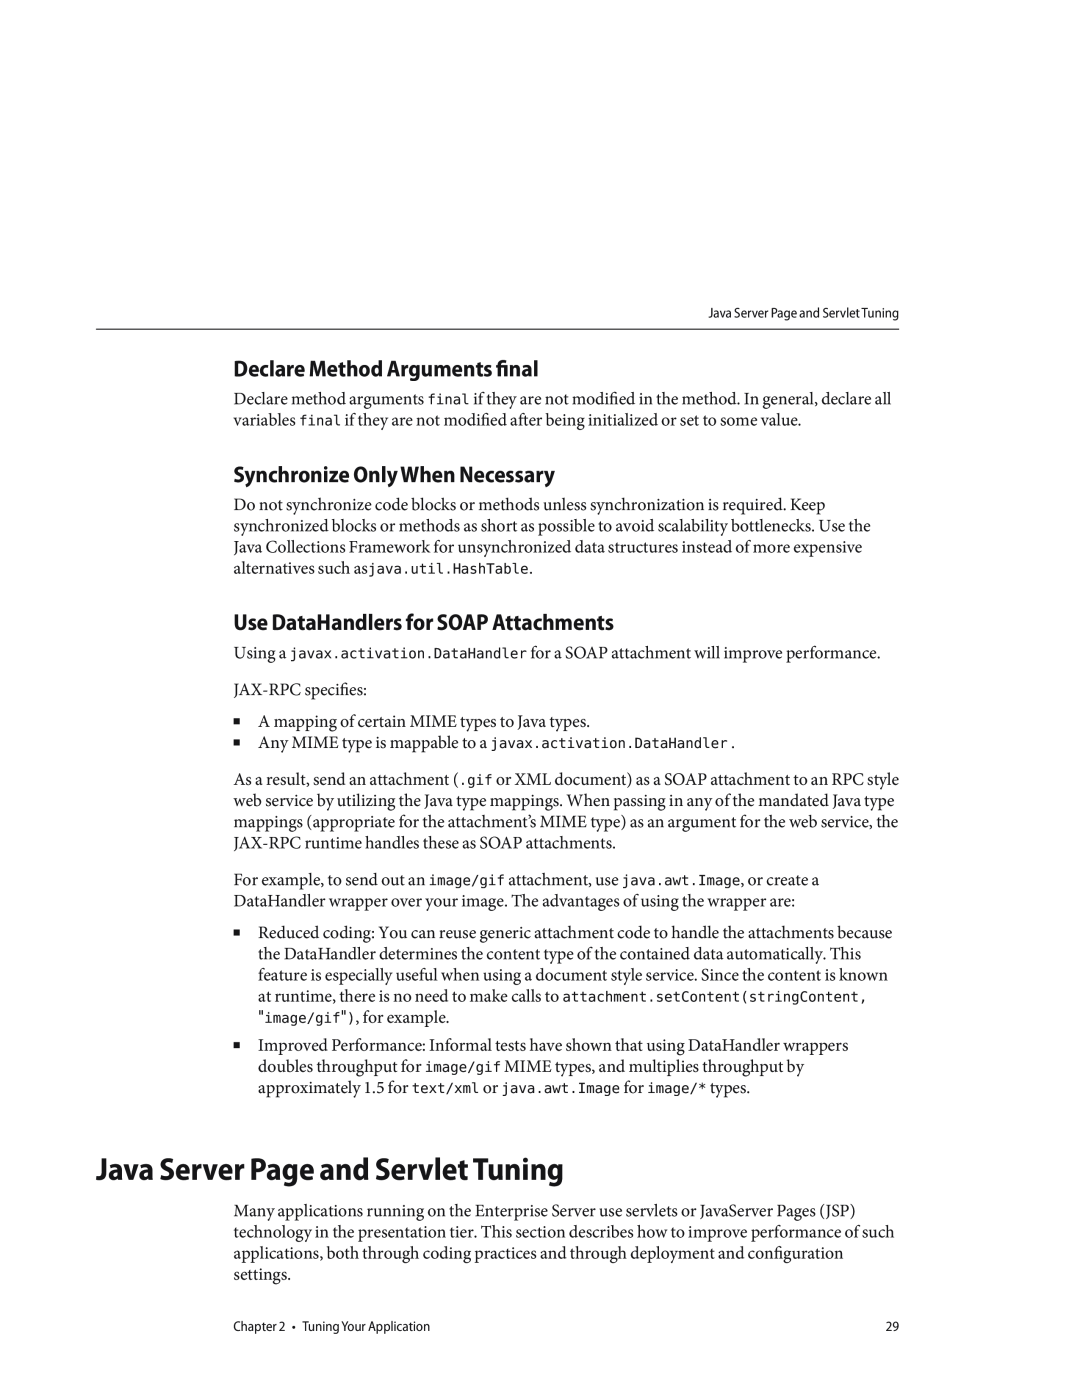 Sun Microsystems 820434310 manual Java Server Page and Servlet Tuning, Declare Method Arguments final 